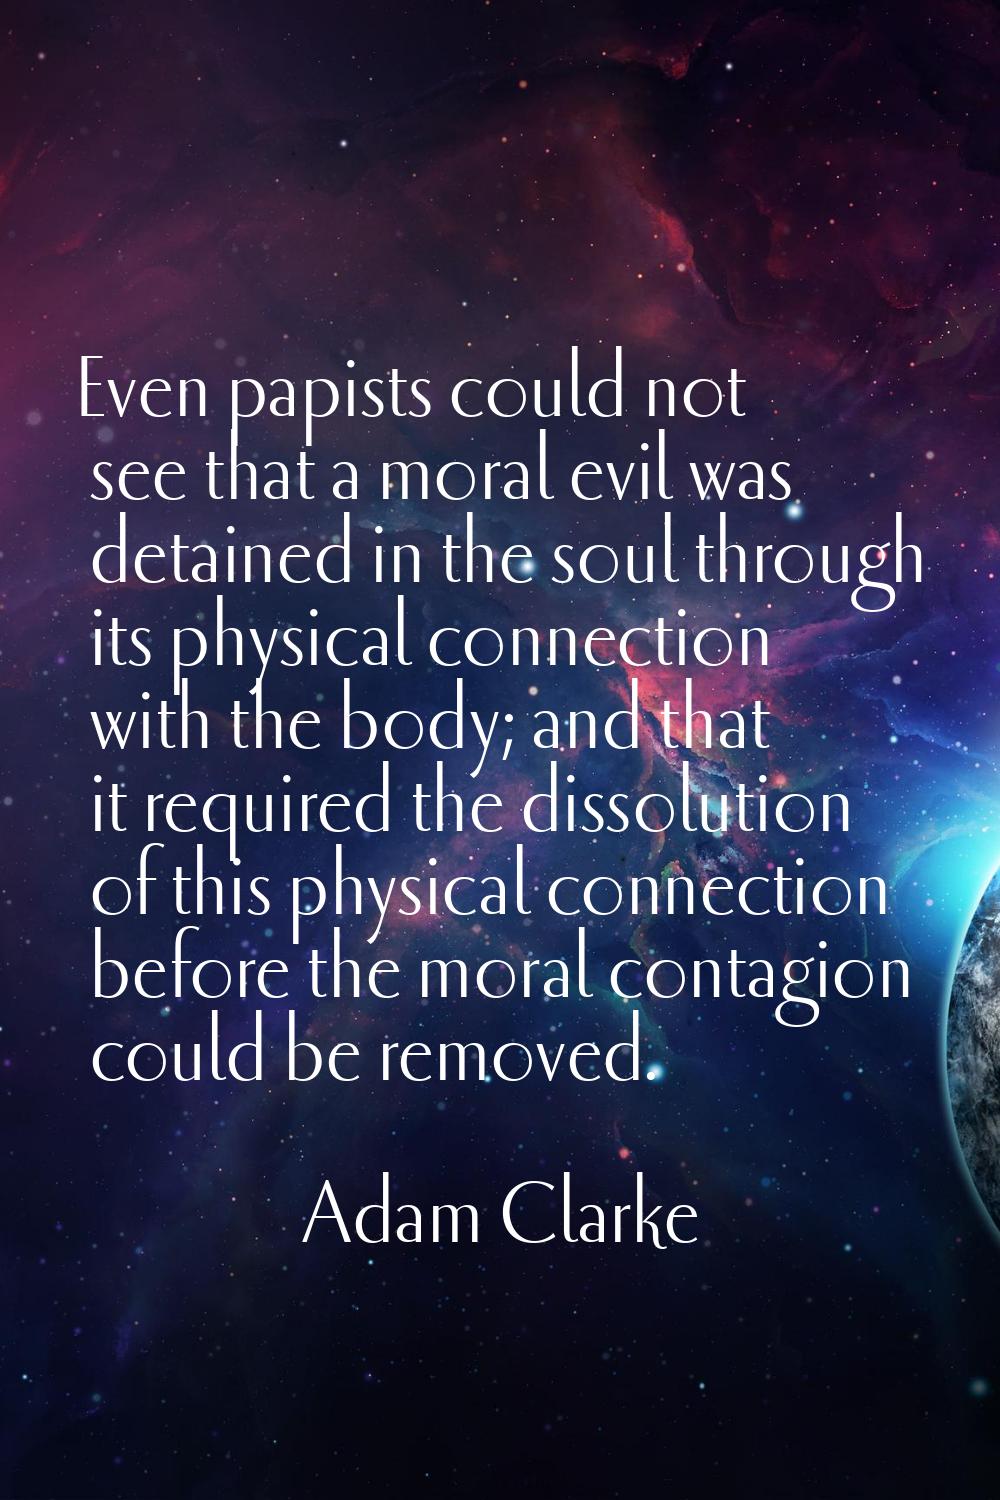 Even papists could not see that a moral evil was detained in the soul through its physical connecti